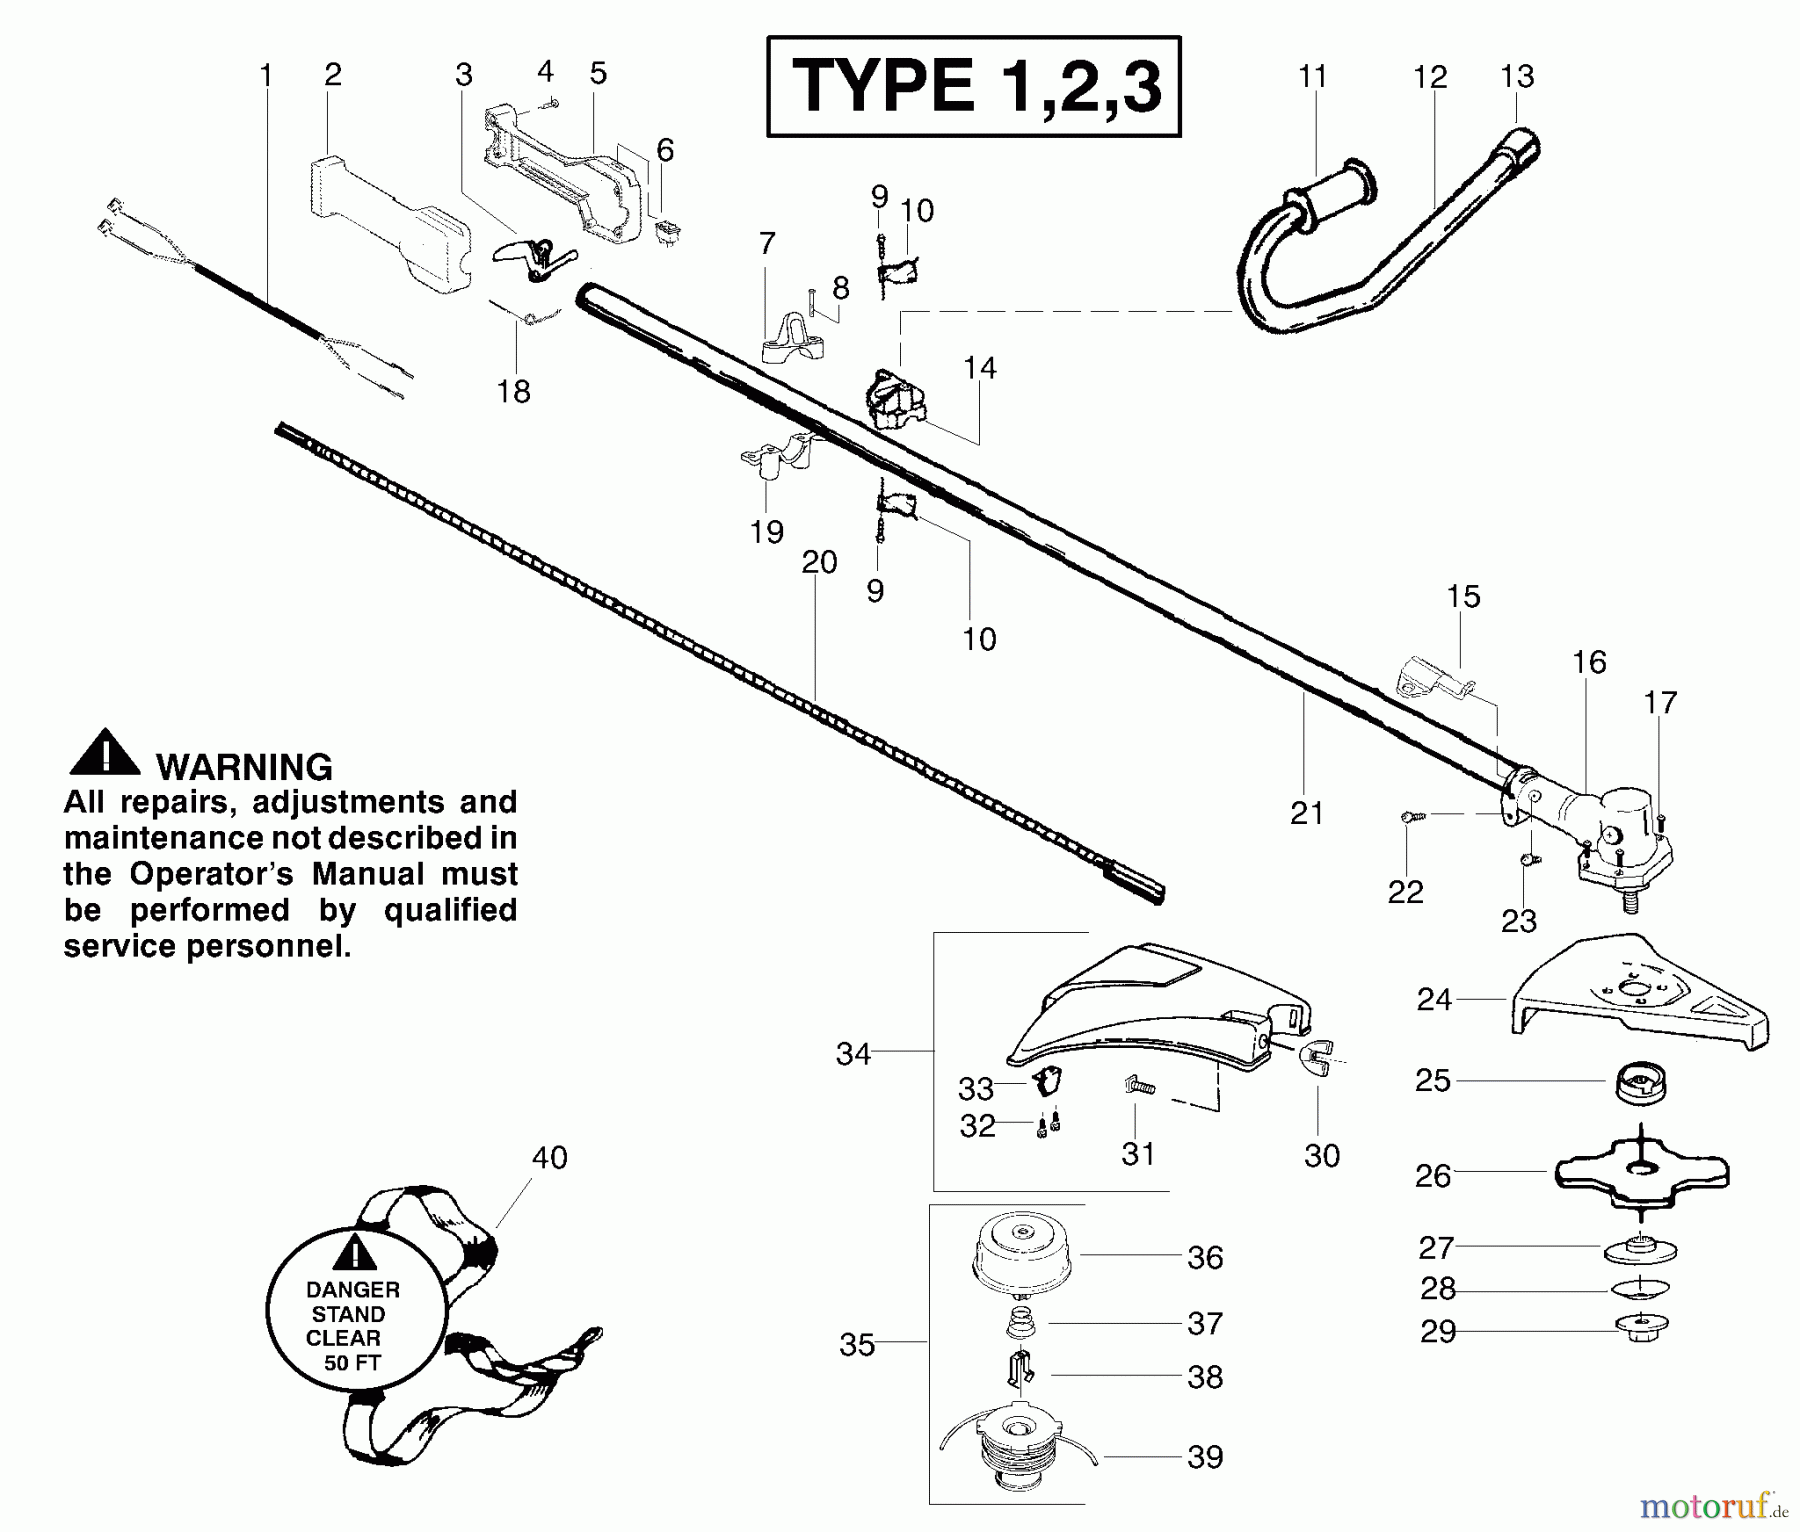  Poulan / Weed Eater Motorsensen, Trimmer BC2500LE (Type 1) - Weed Eater String Trimmer Handle & Driveshaft Assembly Type 1-3